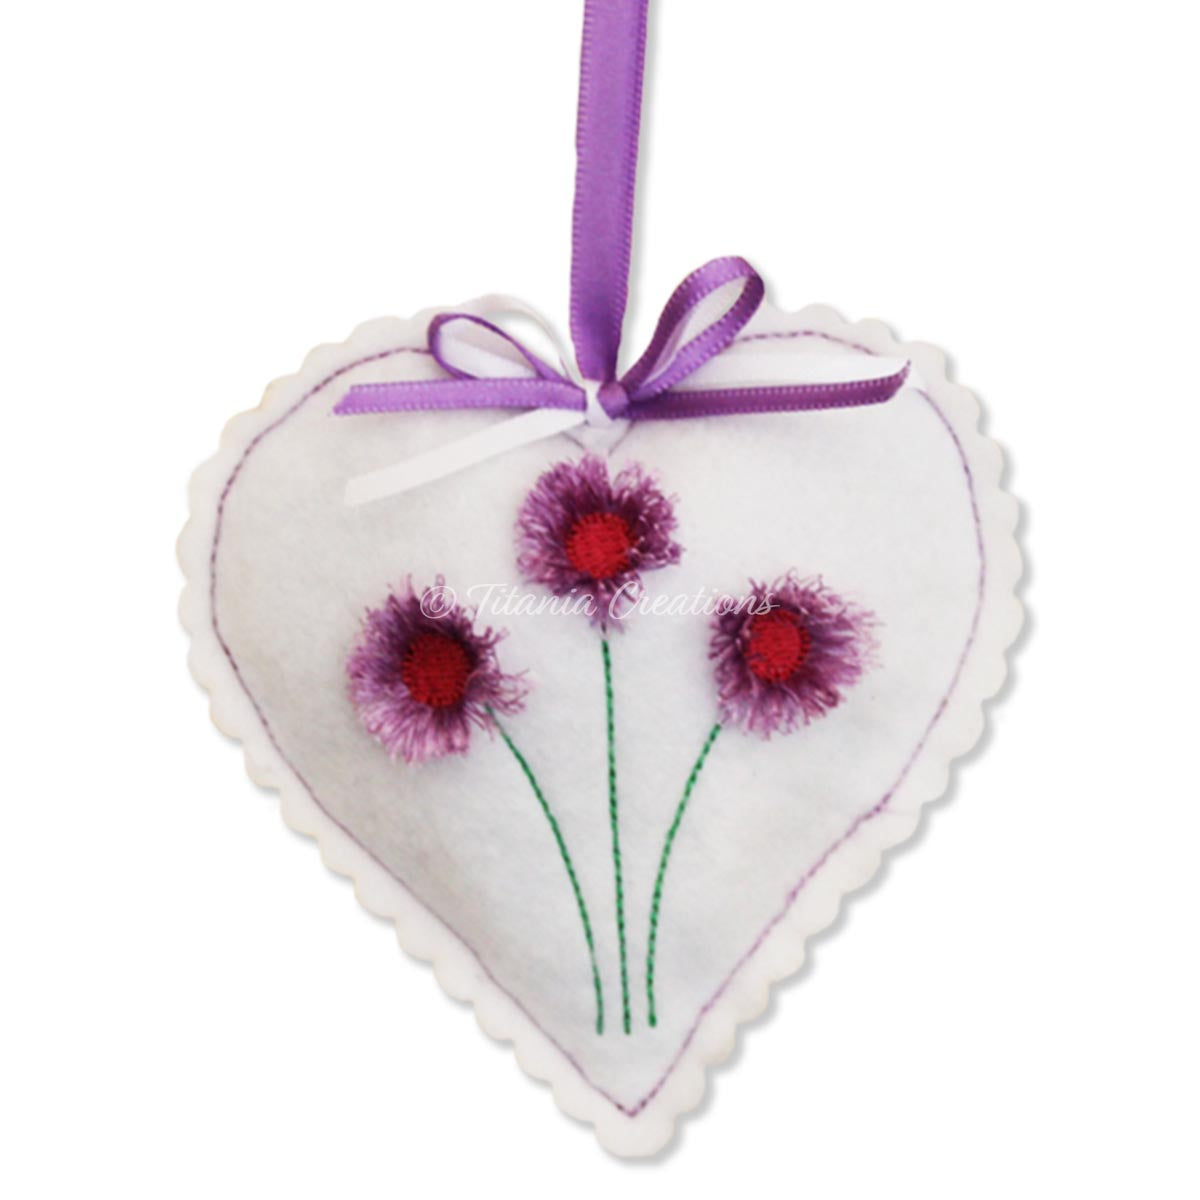 ITH Fringed Flowers Heart 4x4 Two Versions Included.